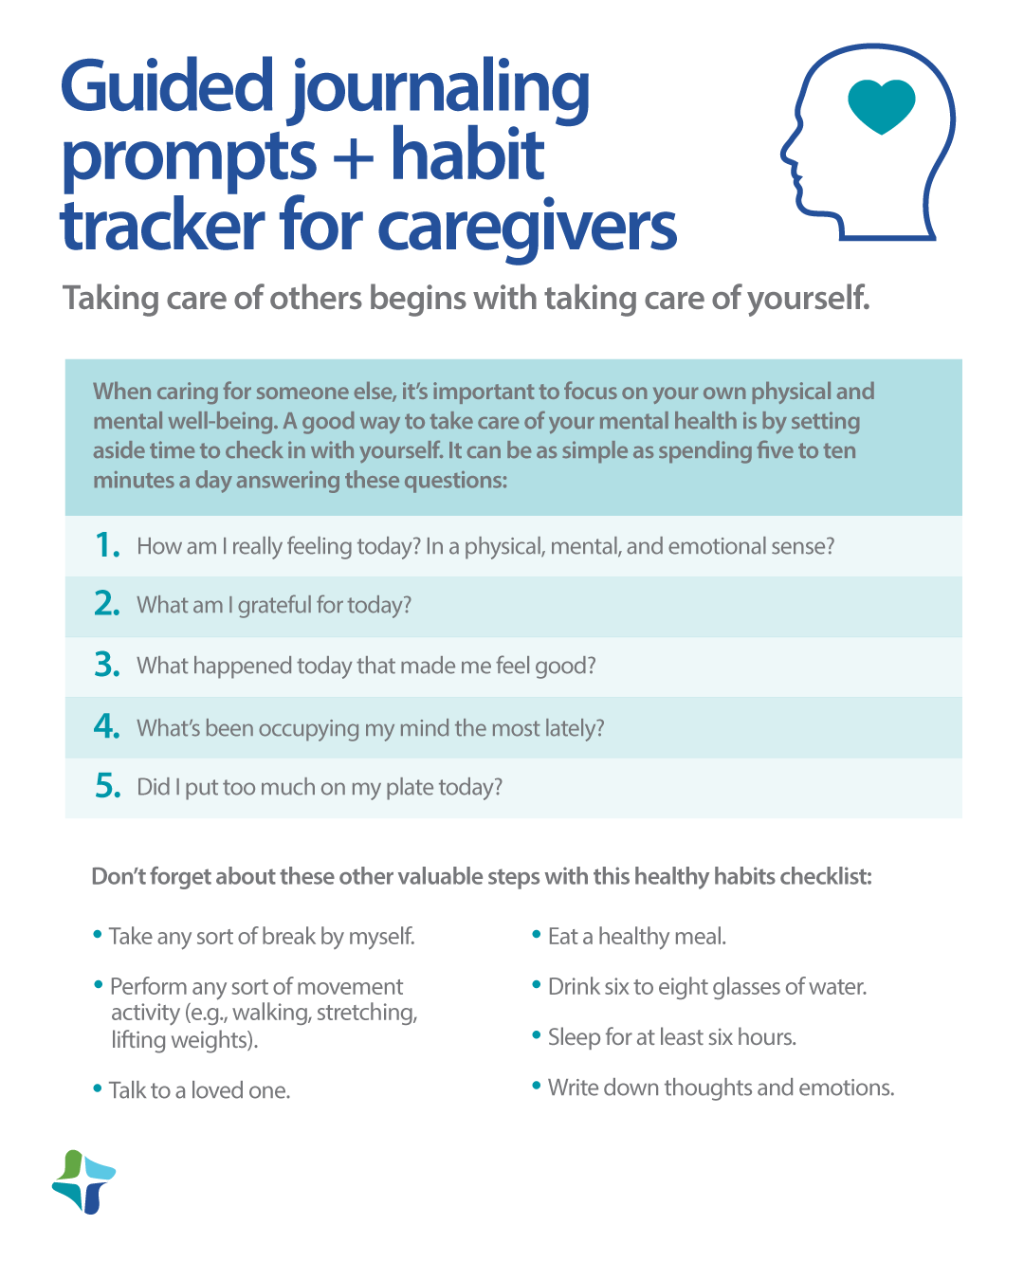 Infographic with prompts to journal and check in on your mental health, along with a healthy habits checklist for caregivers. 